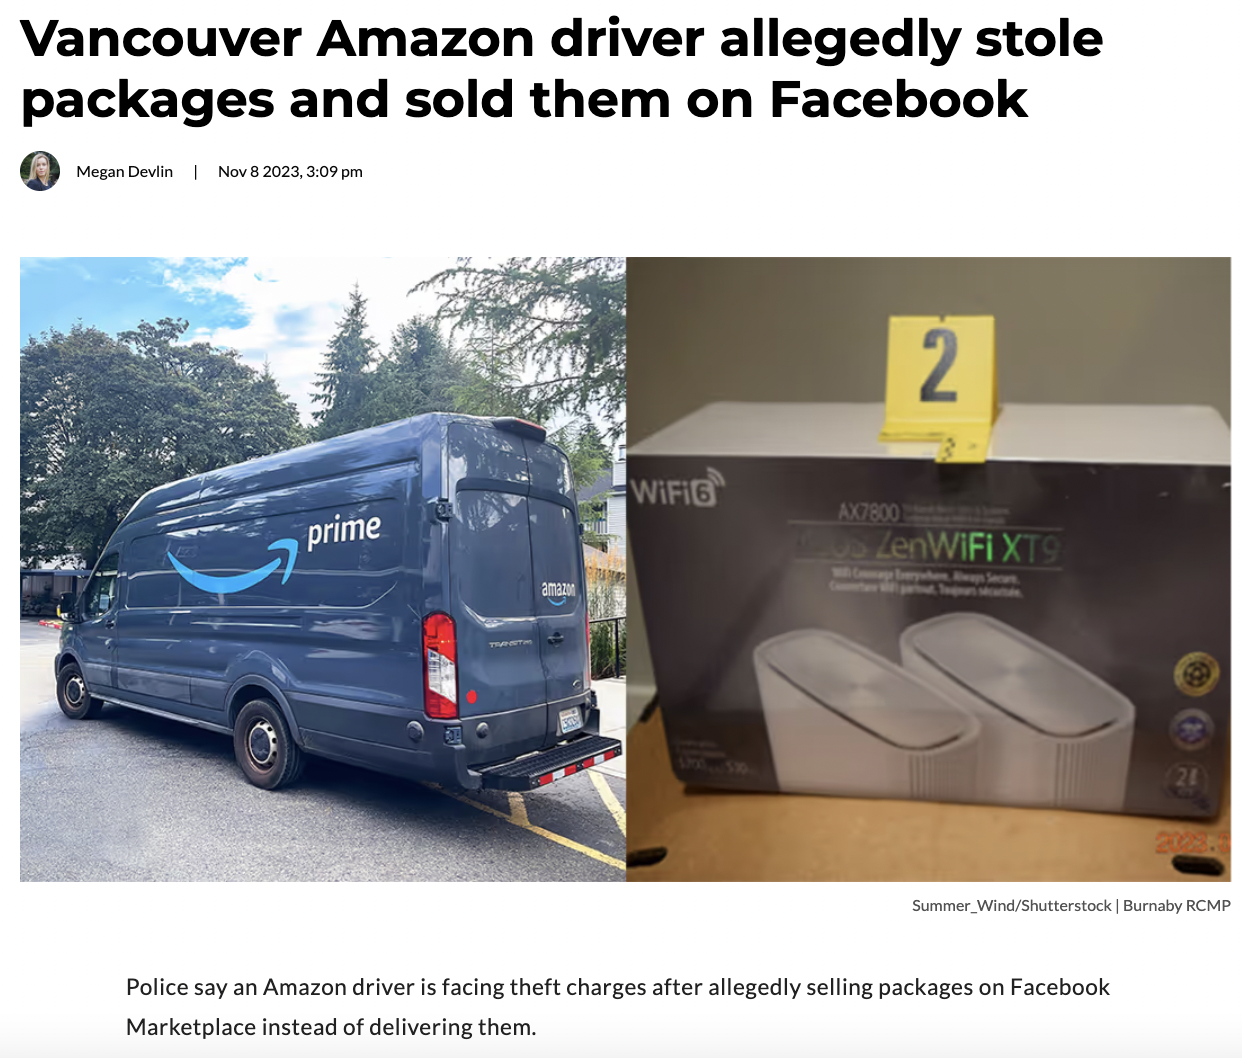 commercial vehicle - Vancouver Amazon driver allegedly stole packages and sold them on Facebook Megan Devlin | , prime Wifig AX7800 2 ZenWiFi XT9 Summer WindShutterstock | Burnaby Rcmp Police say an Amazon driver is facing theft charges after allegedly se